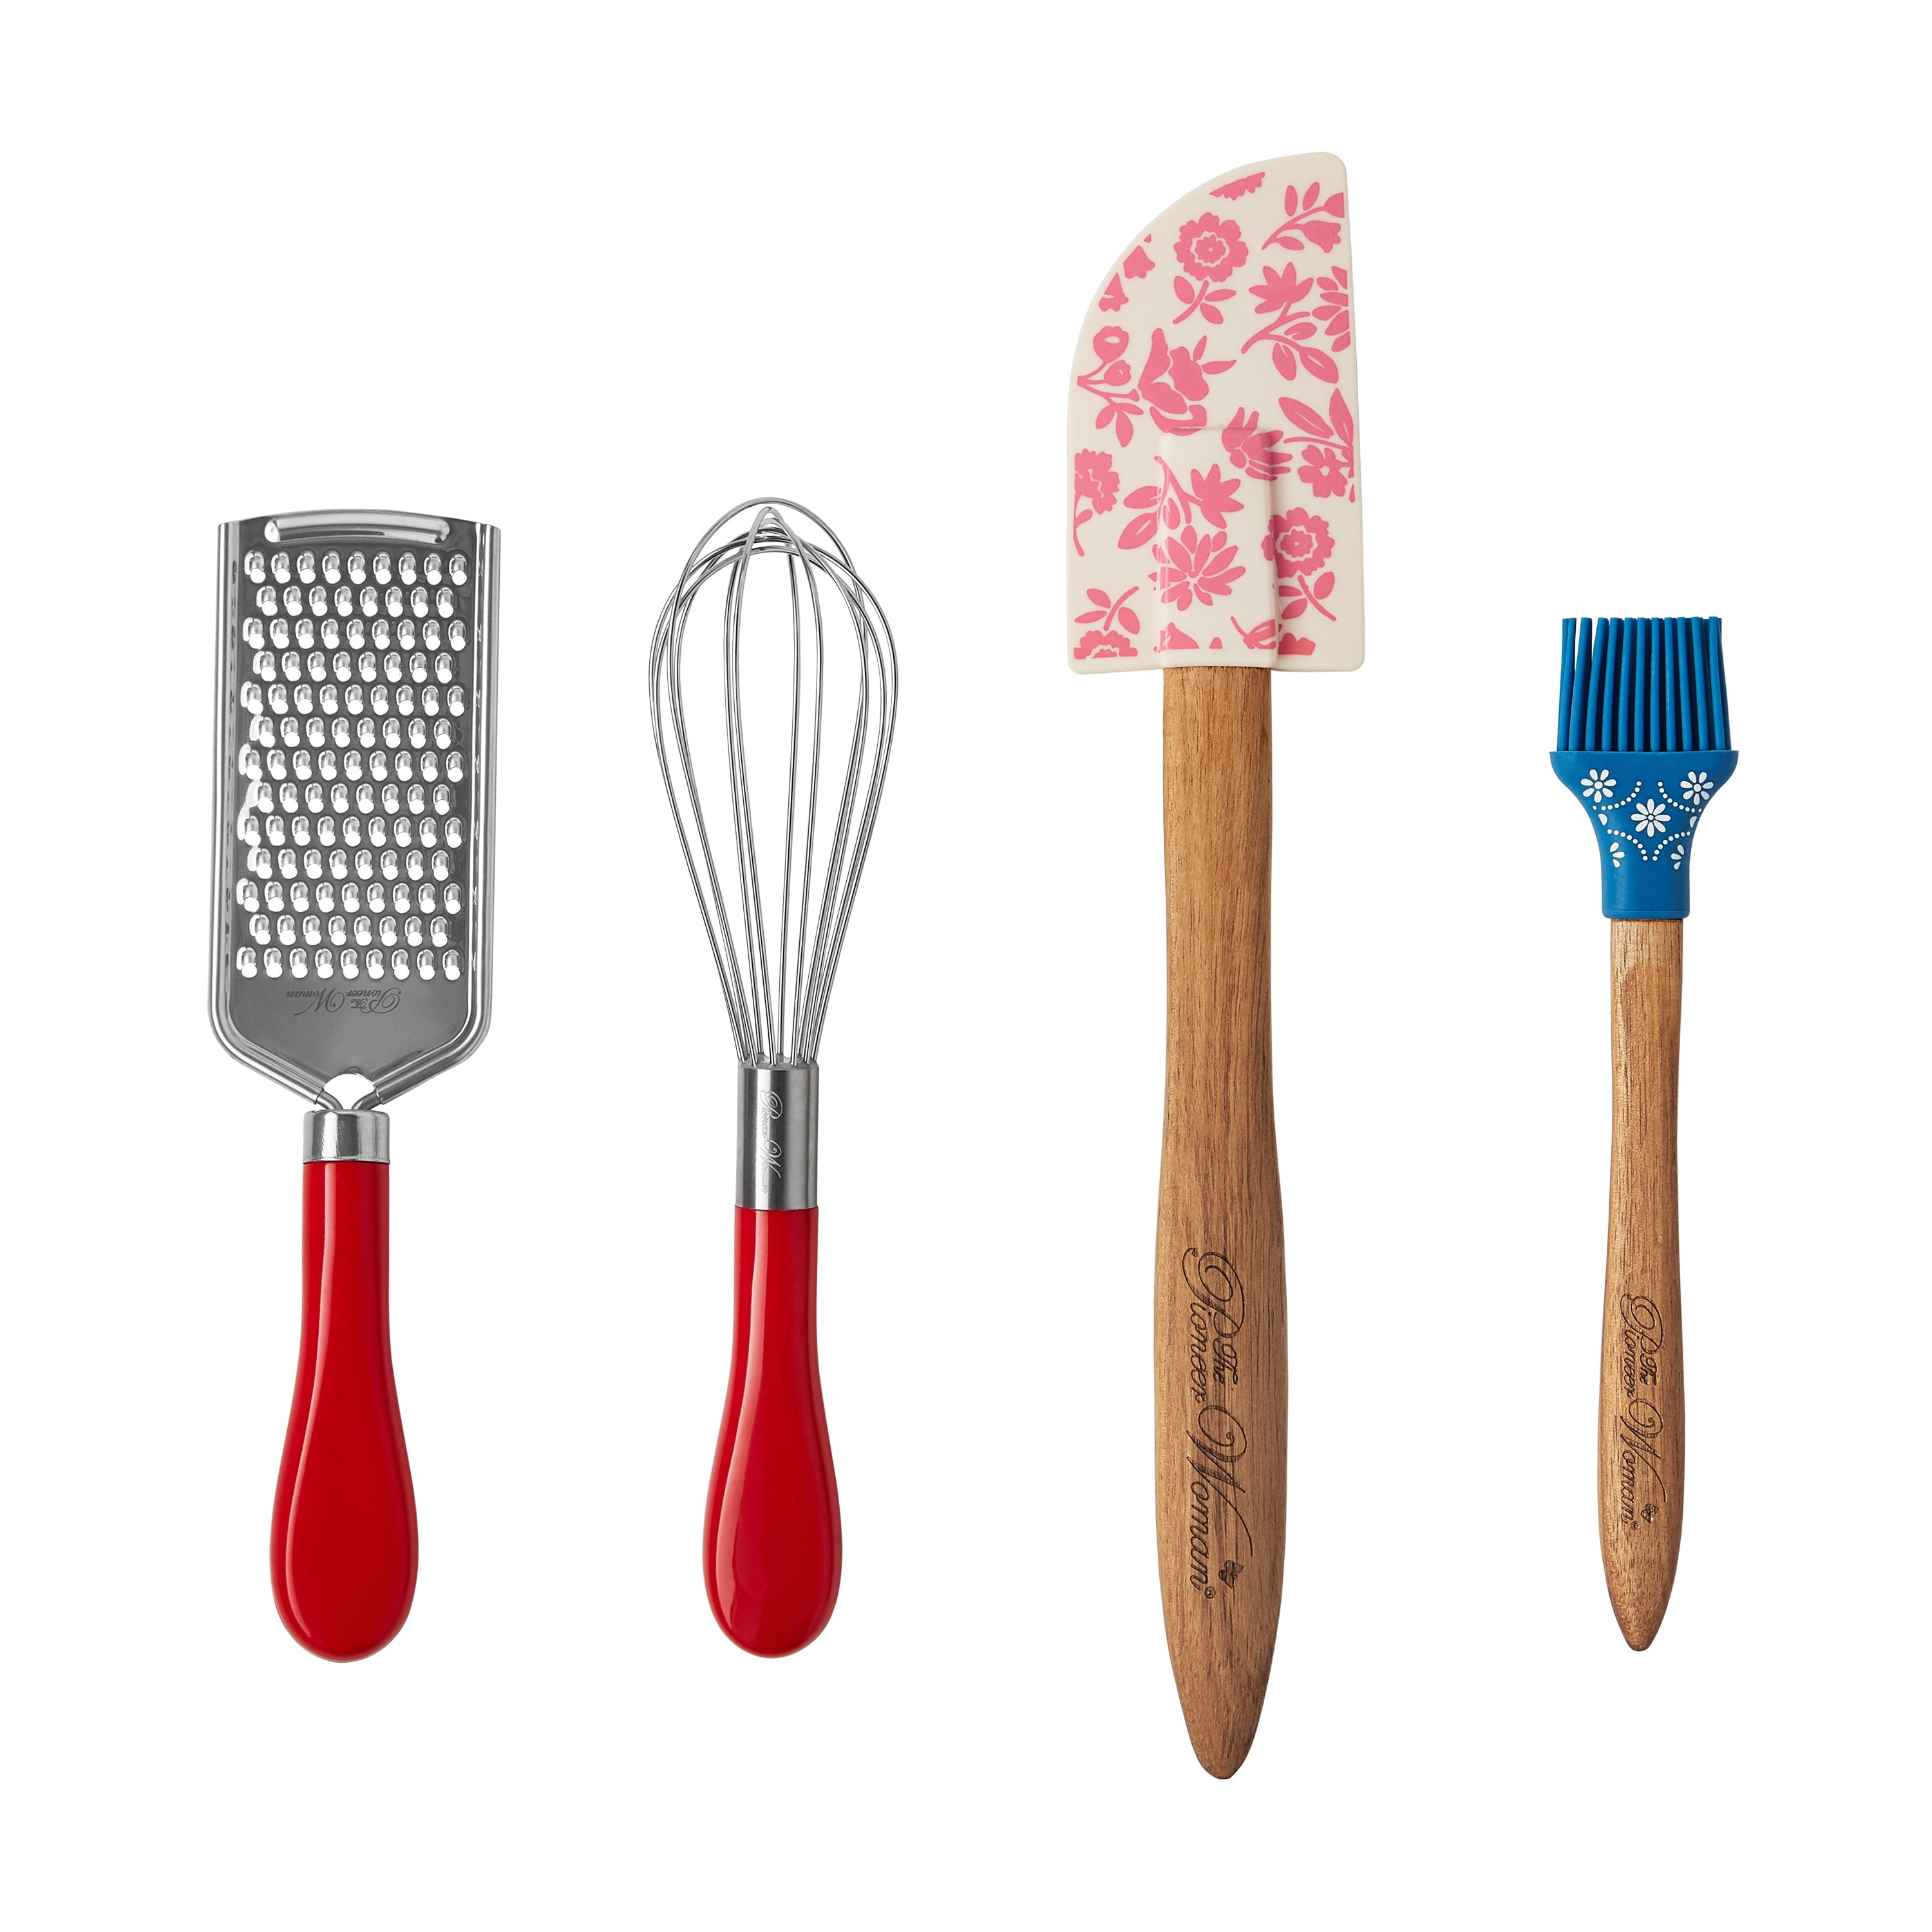 A Top-Selling 15-Piece Cooking Utensil Set That's Perfect for Holiday Meal  Prep Is on Sale for $1.50 Apiece